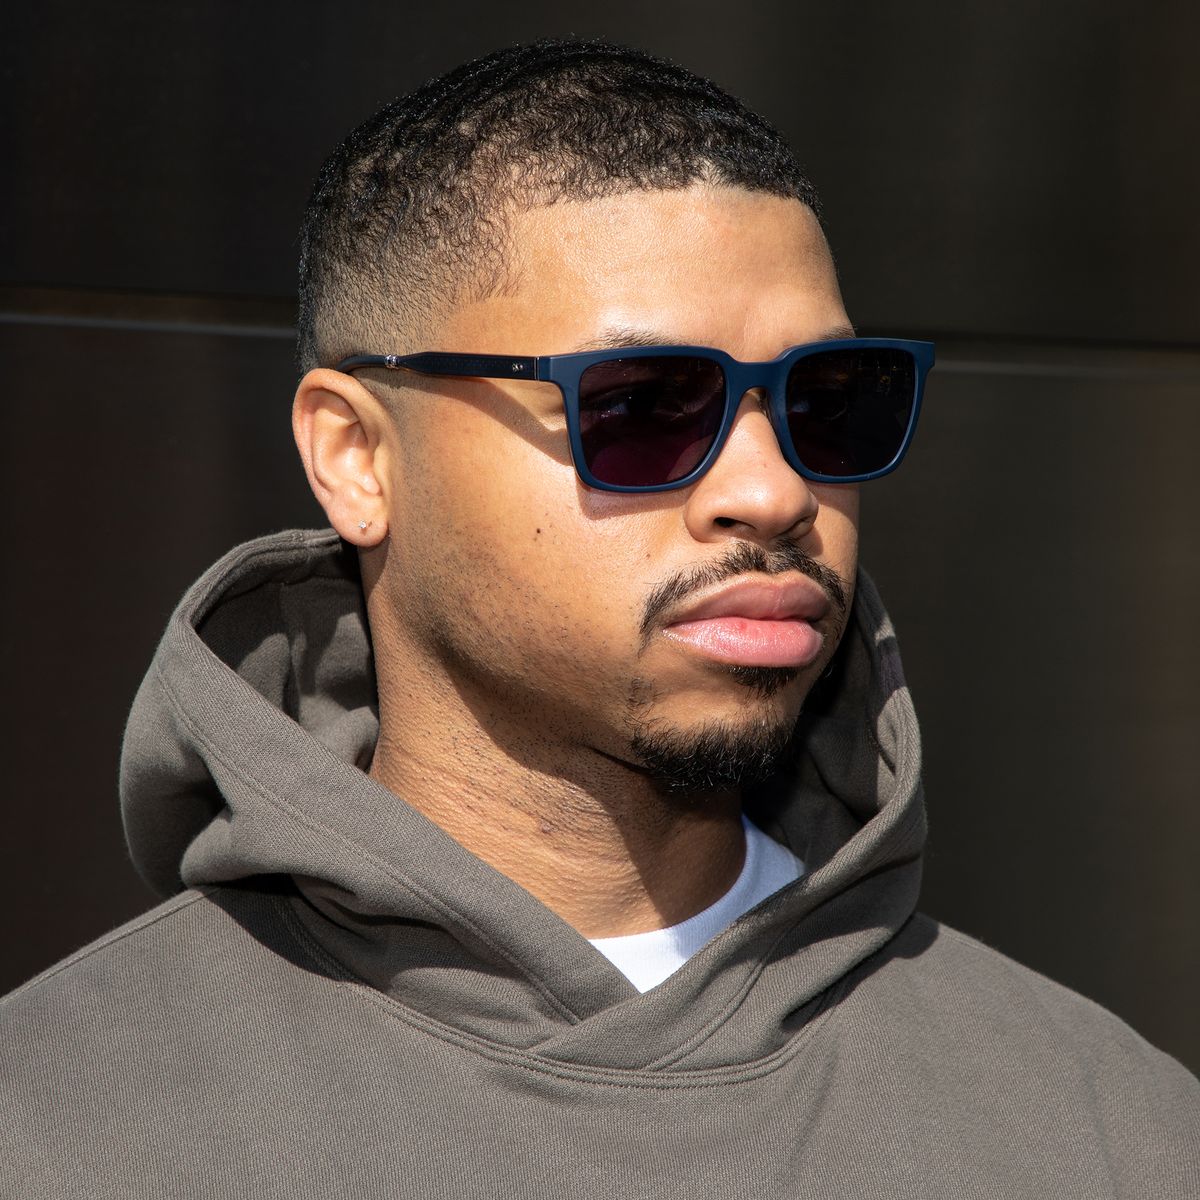 Pack of 12: Oversized Men Square Angular Sporty Casual Designed Wholesale  Sunglasses